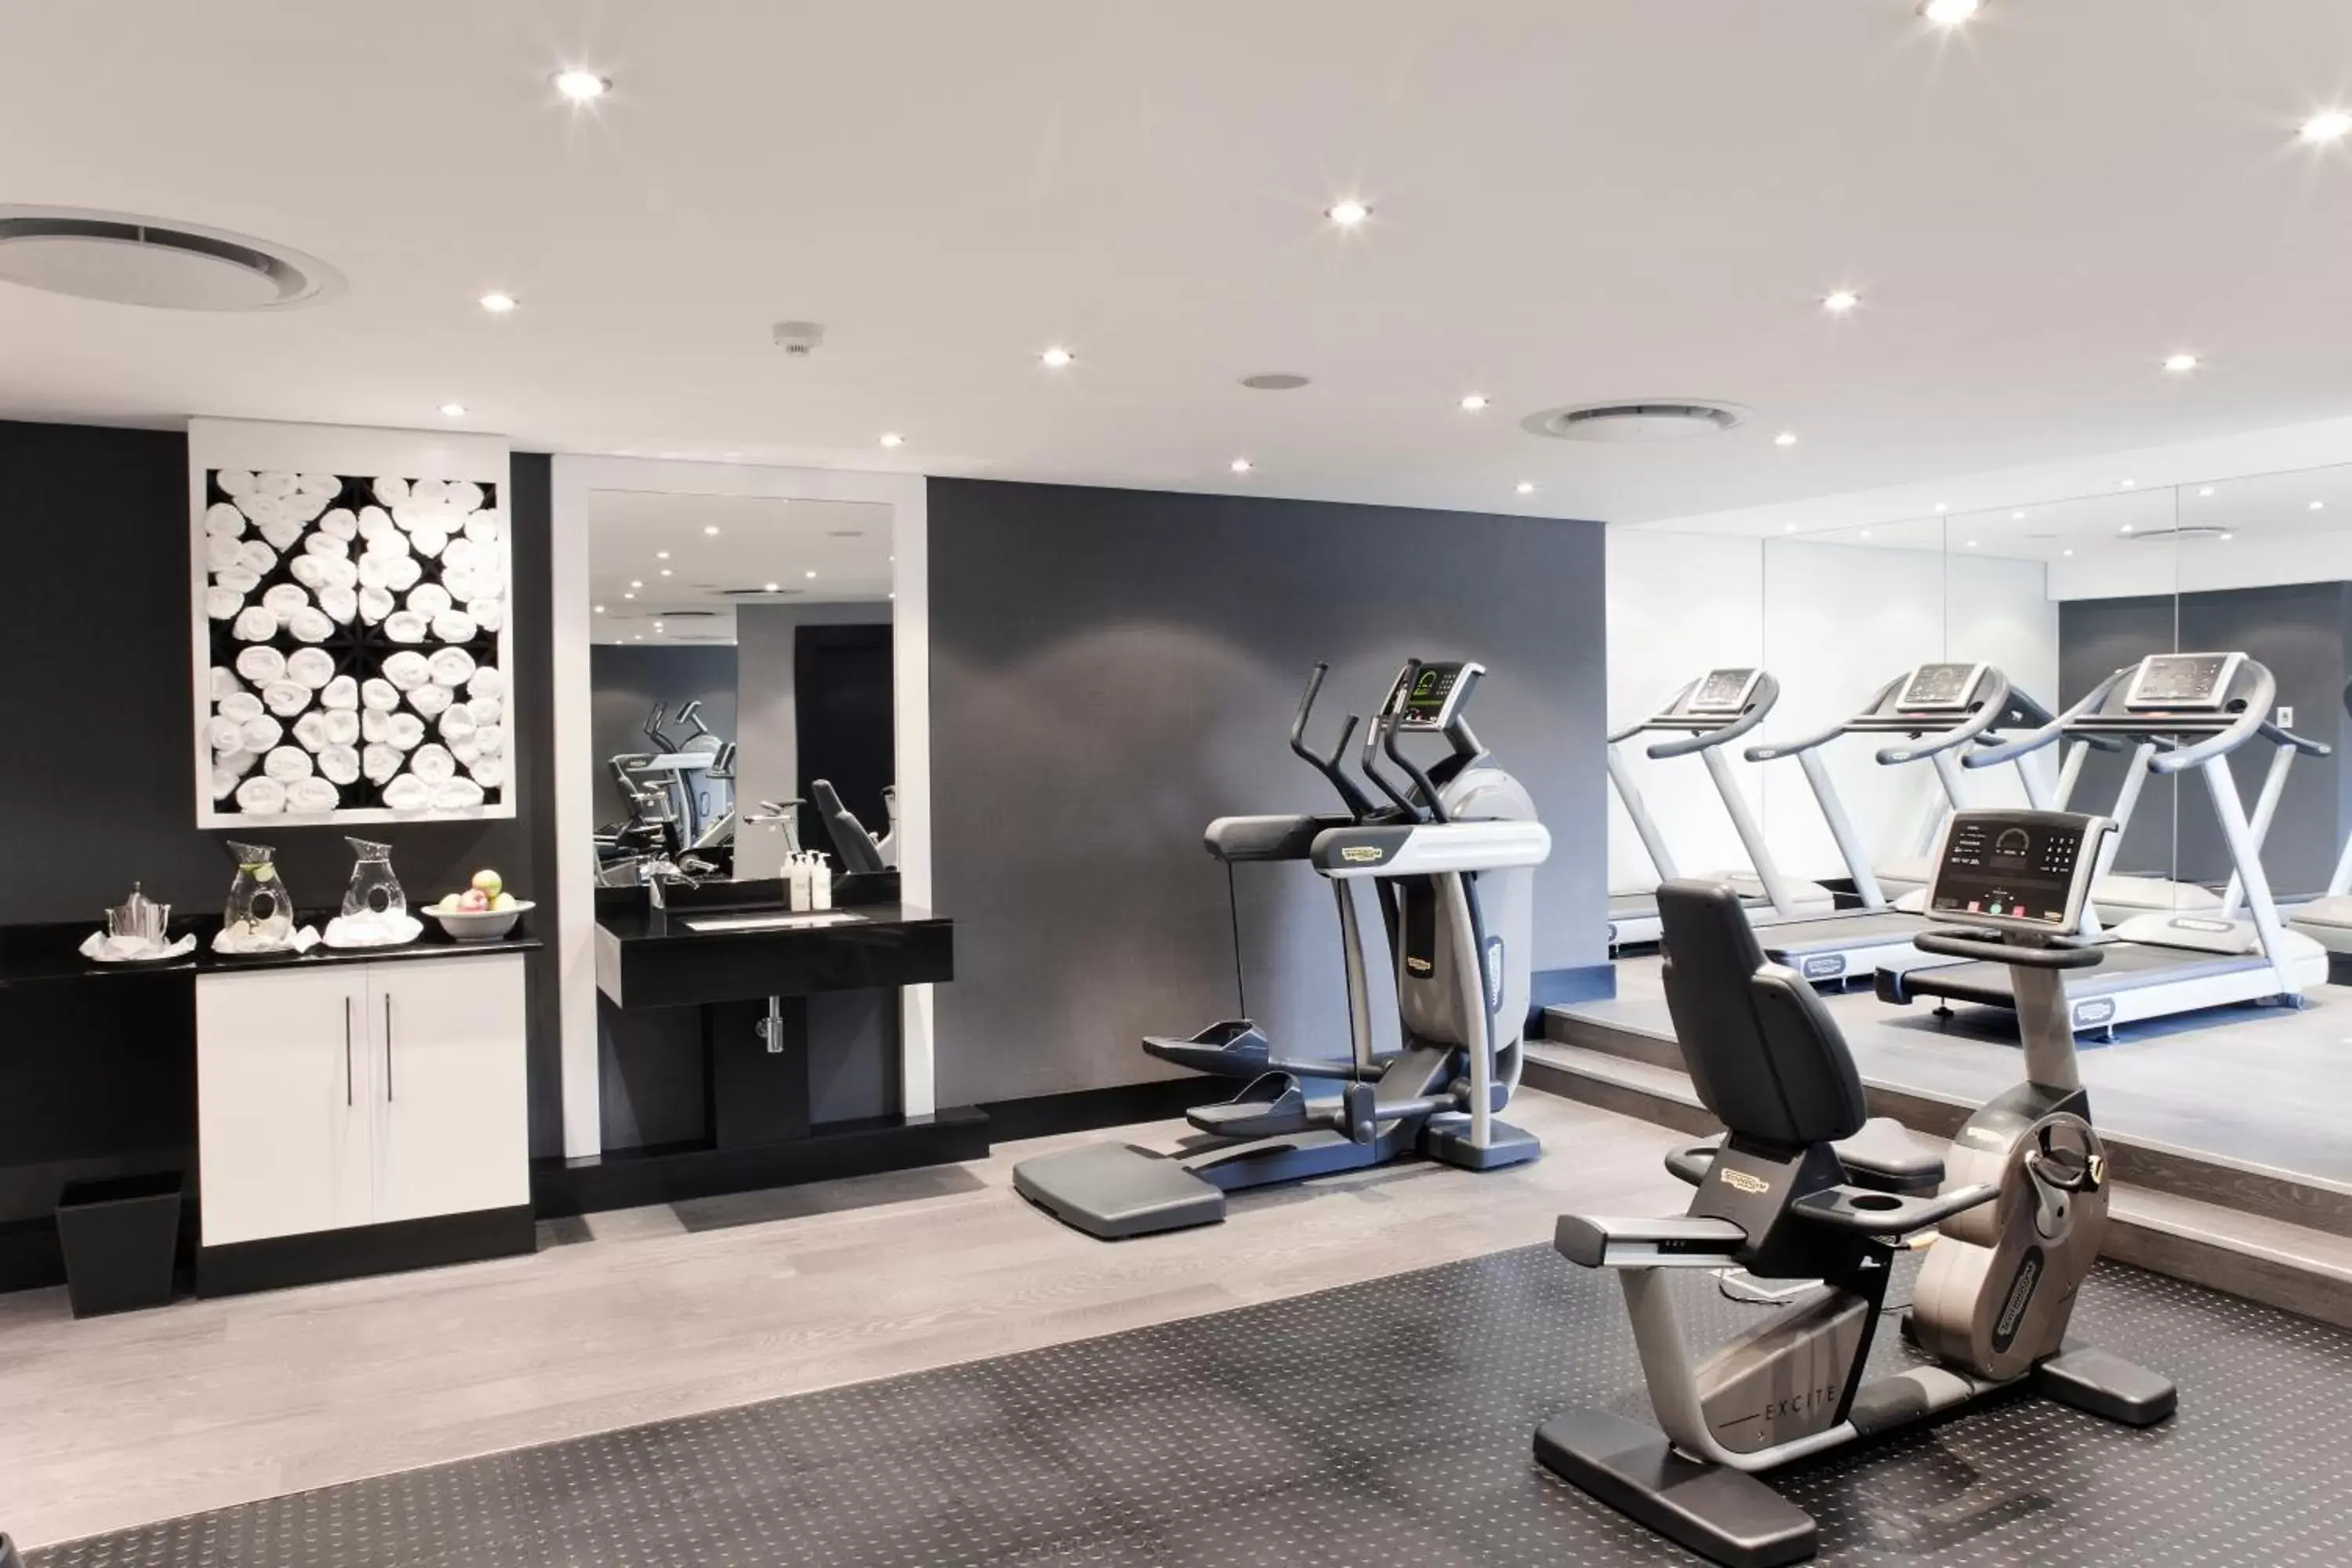 Fitness centre/facilities, Fitness Center/Facilities in The Maslow Hotel, Sandton